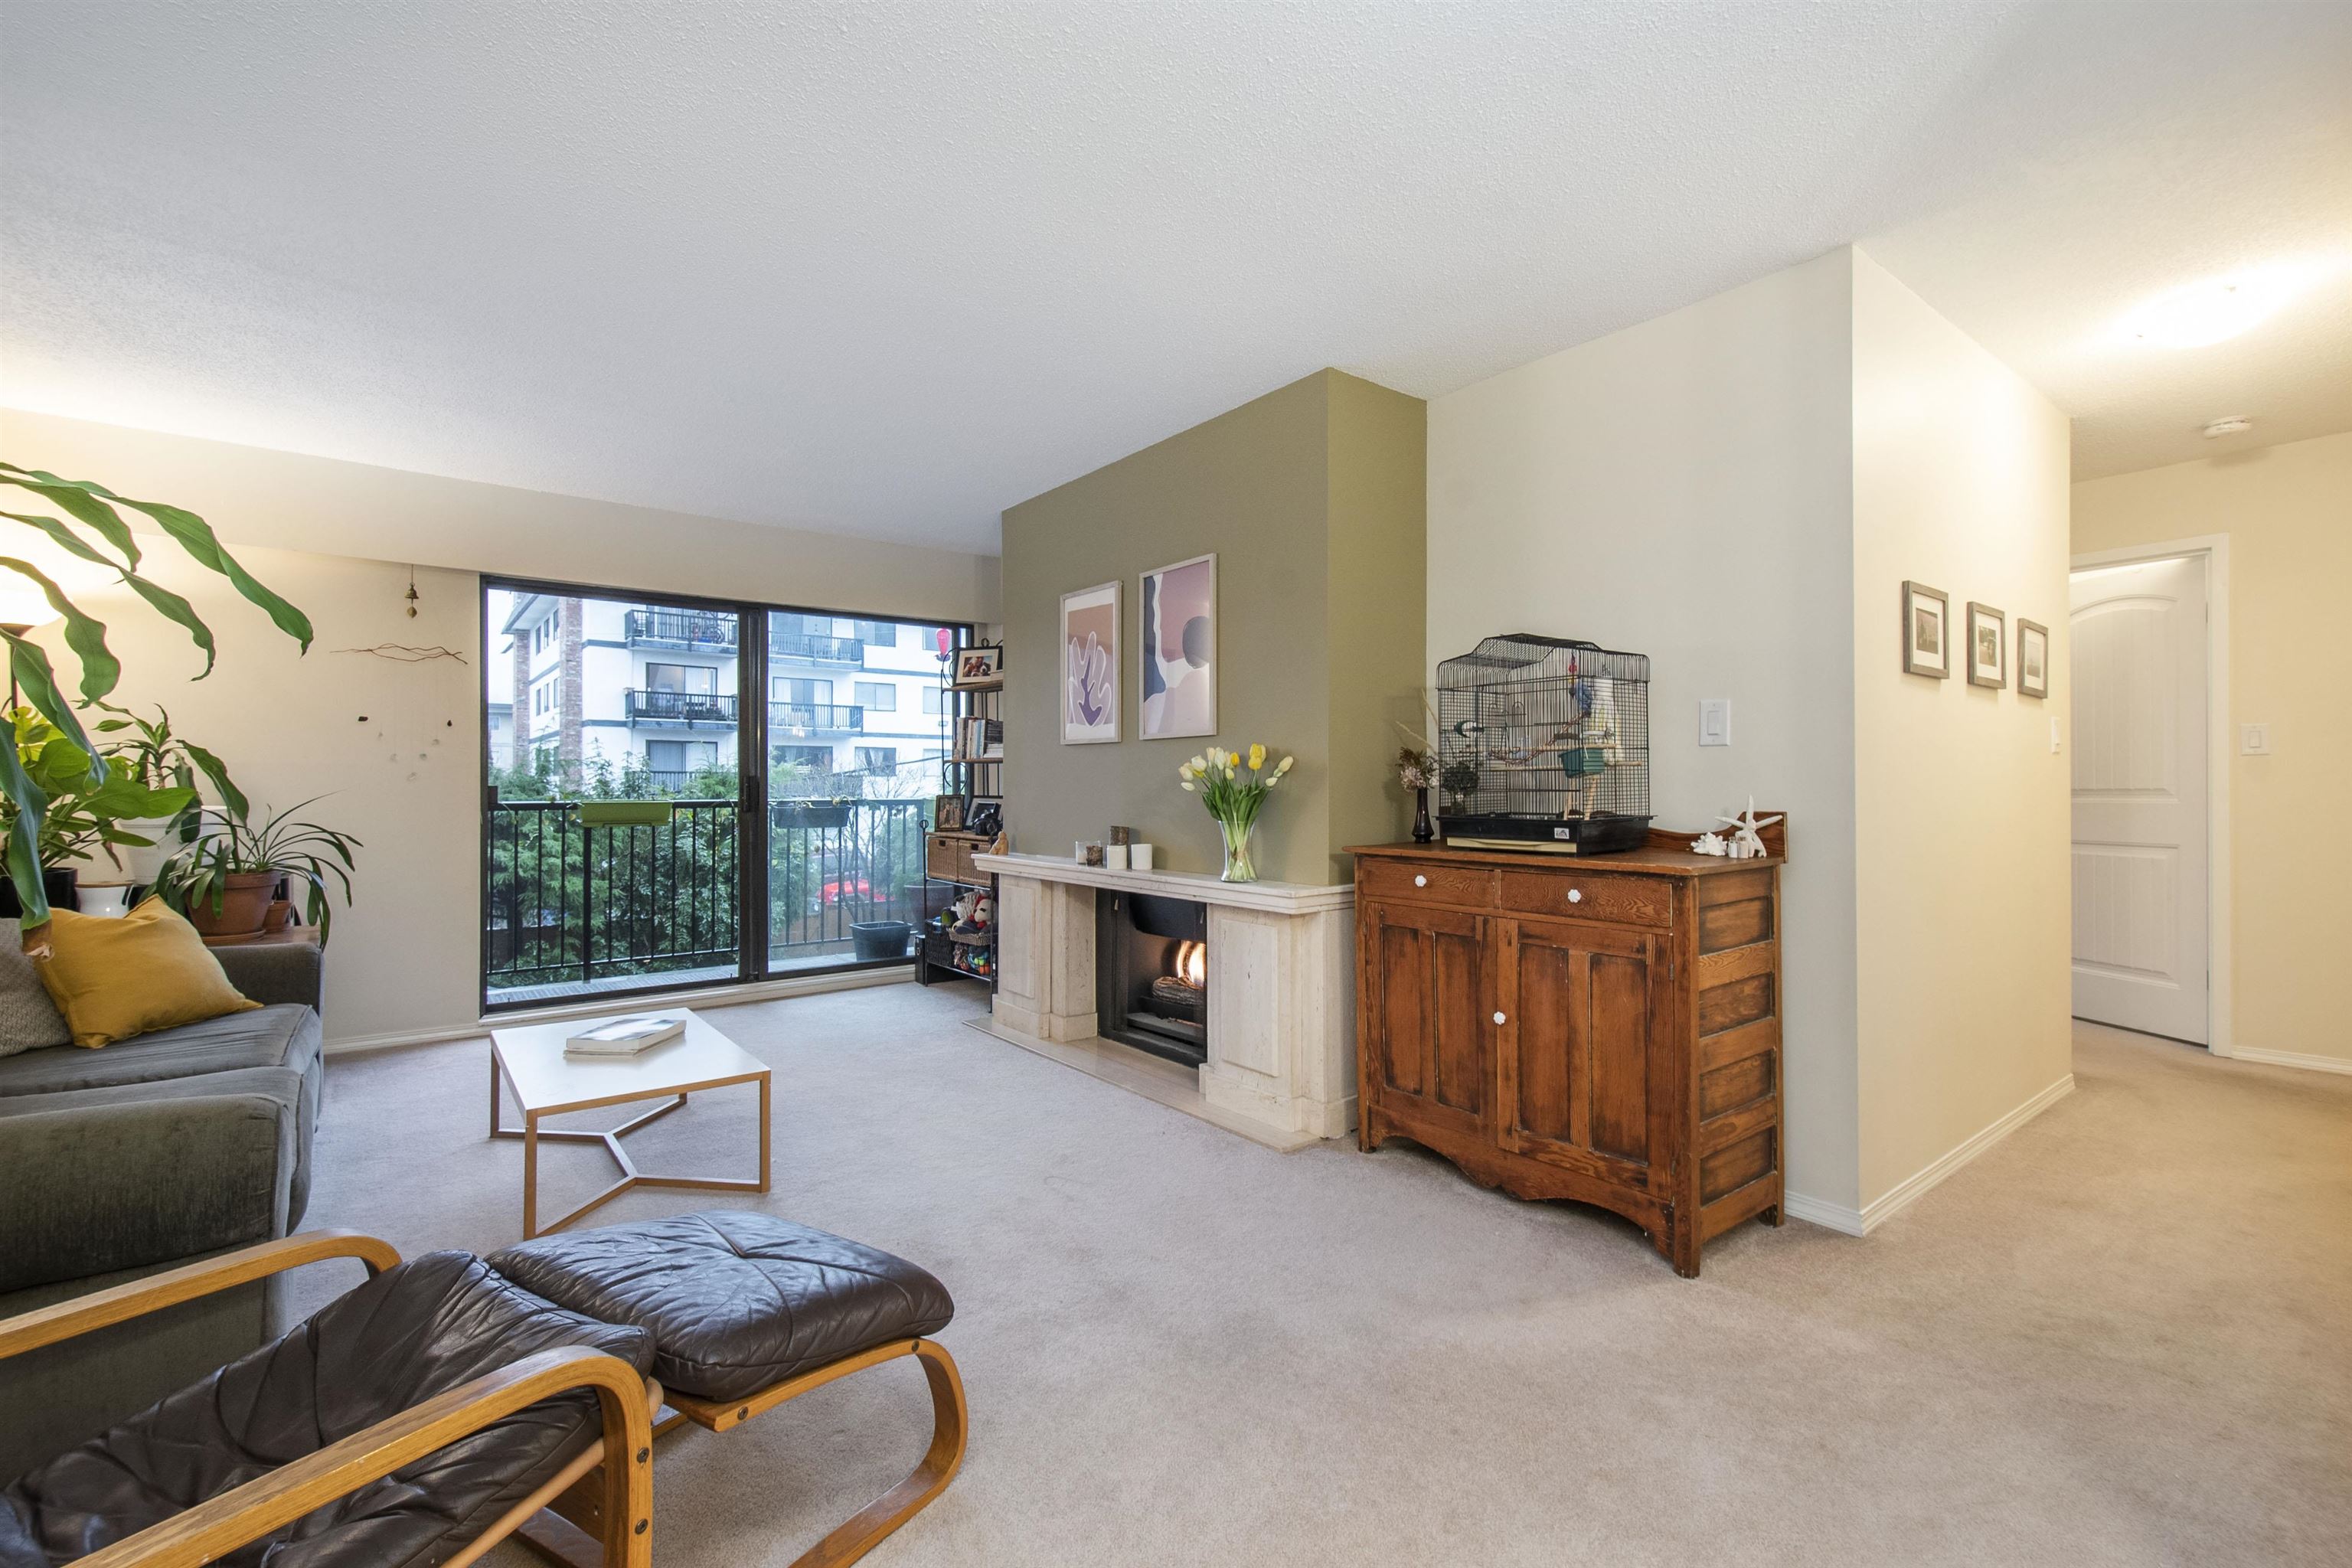 Central Lonsdale Apartment/Condo for sale:  2 bedroom 1,003 sq.ft. (Listed 6400-03-29)